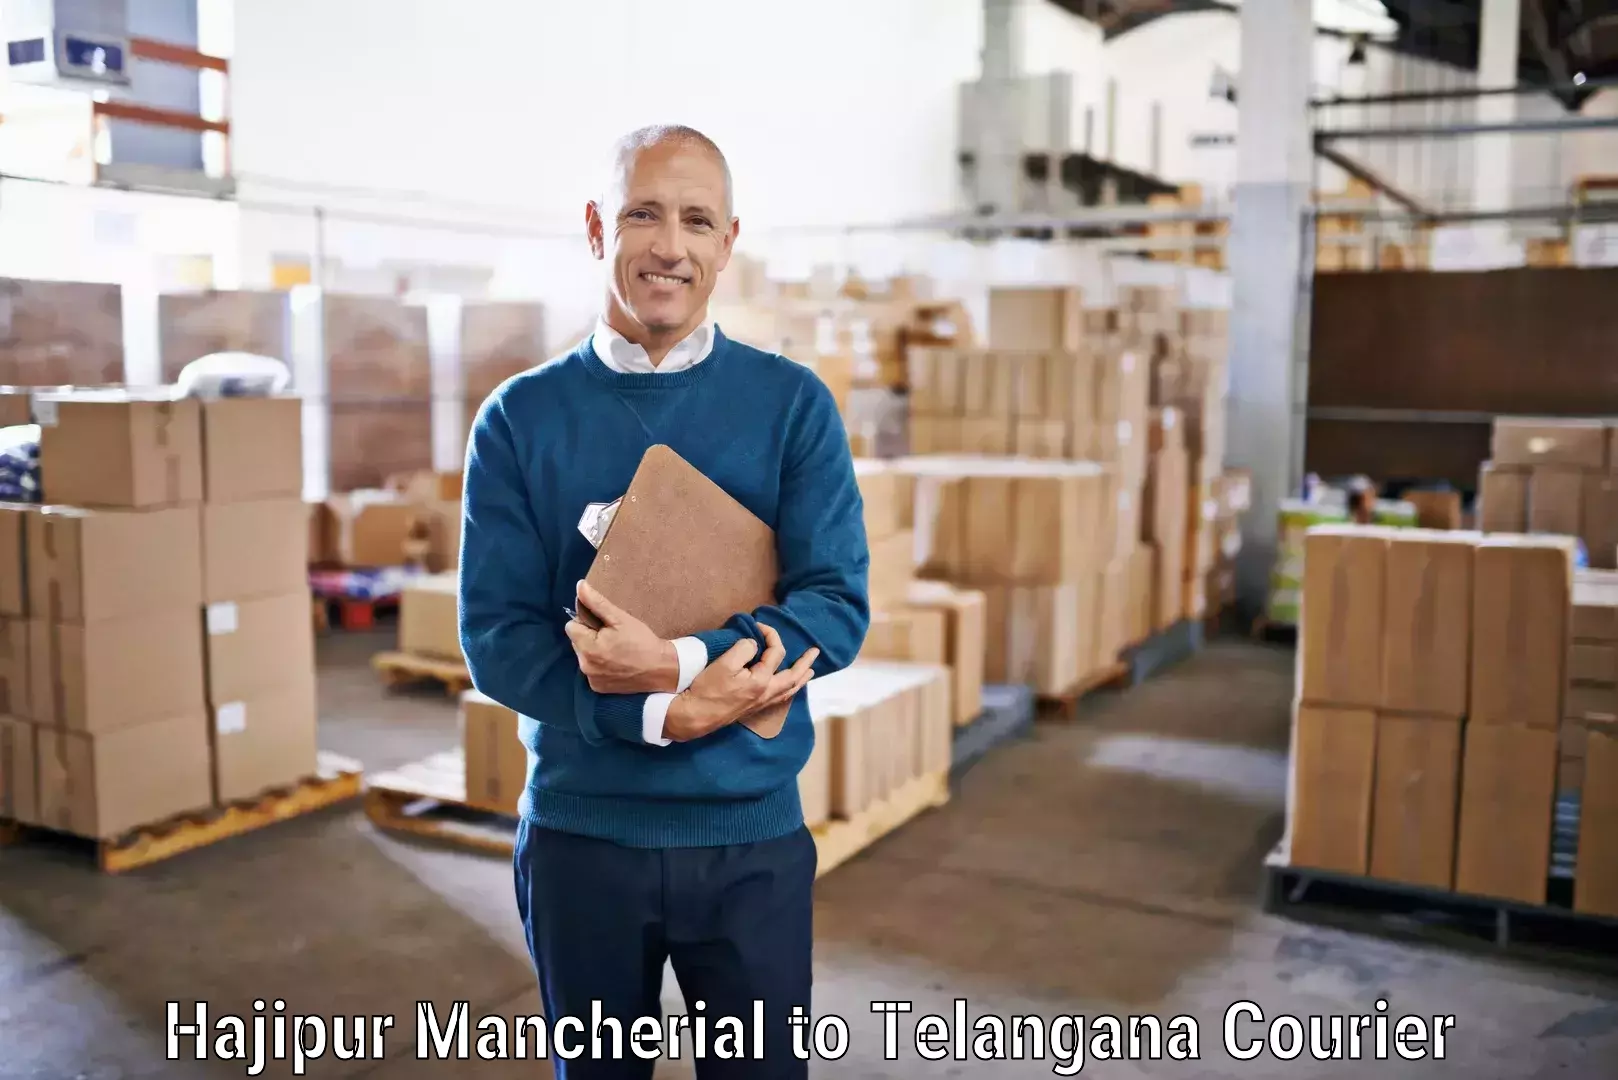 Professional parcel services Hajipur Mancherial to Sangareddy